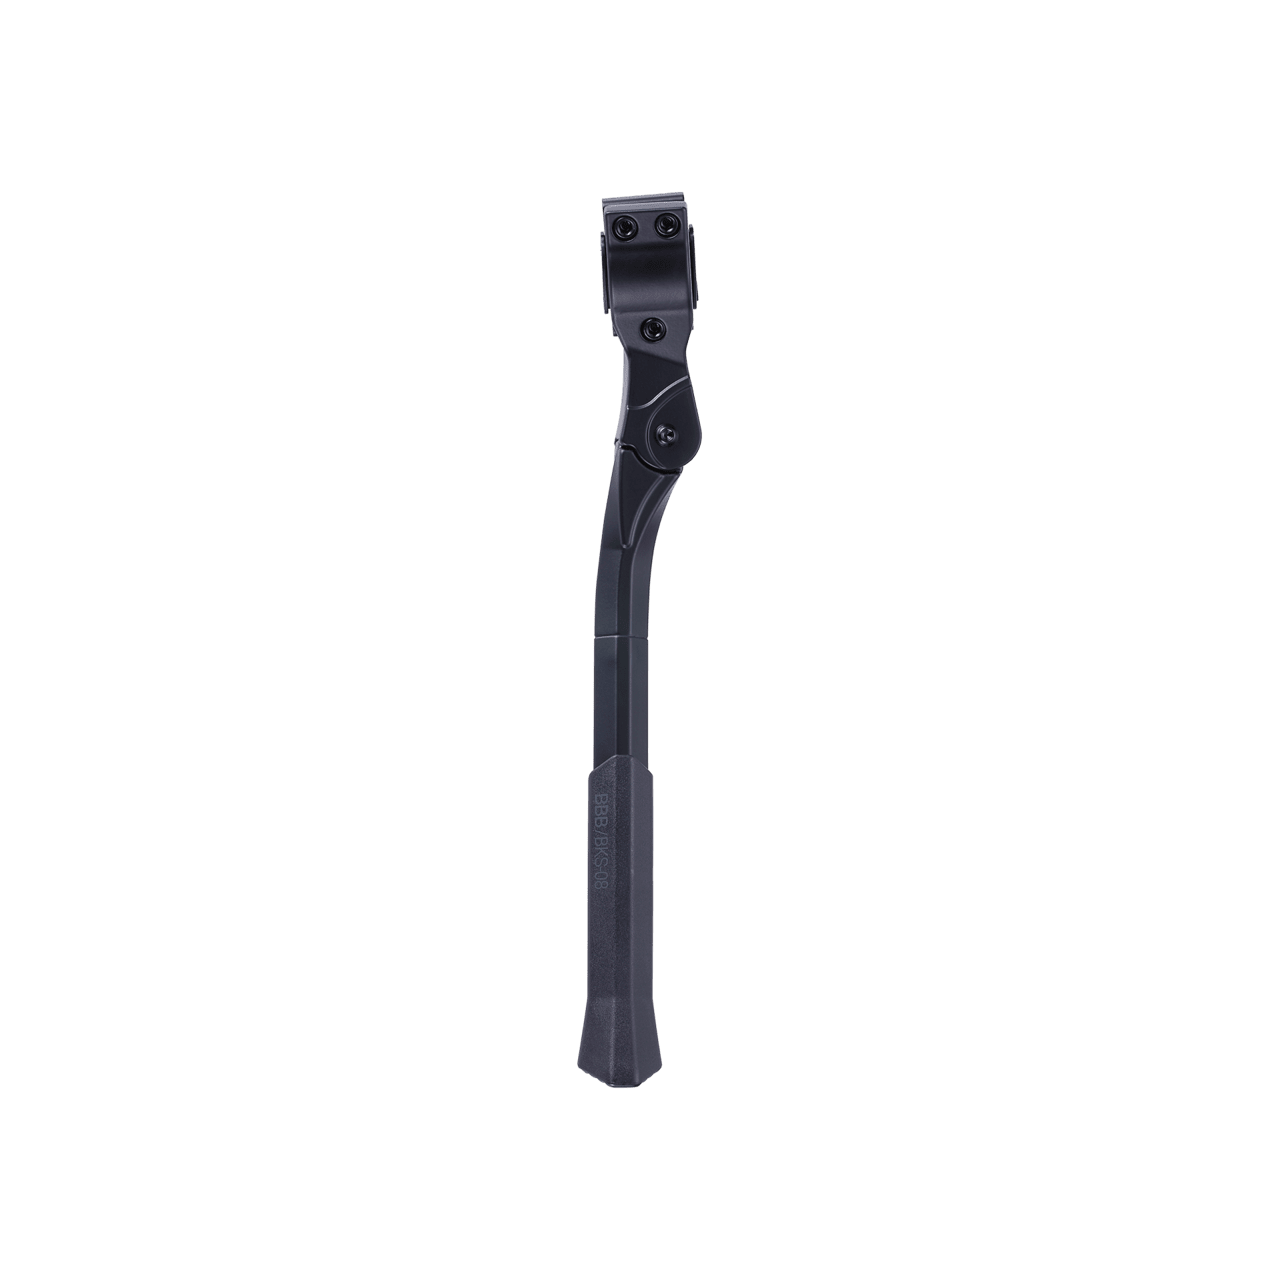 BBB Cycling BKS-08 UniKick bicycle stand, for 26/27.5/28/29" wheels, adjustable length, clamp, rear